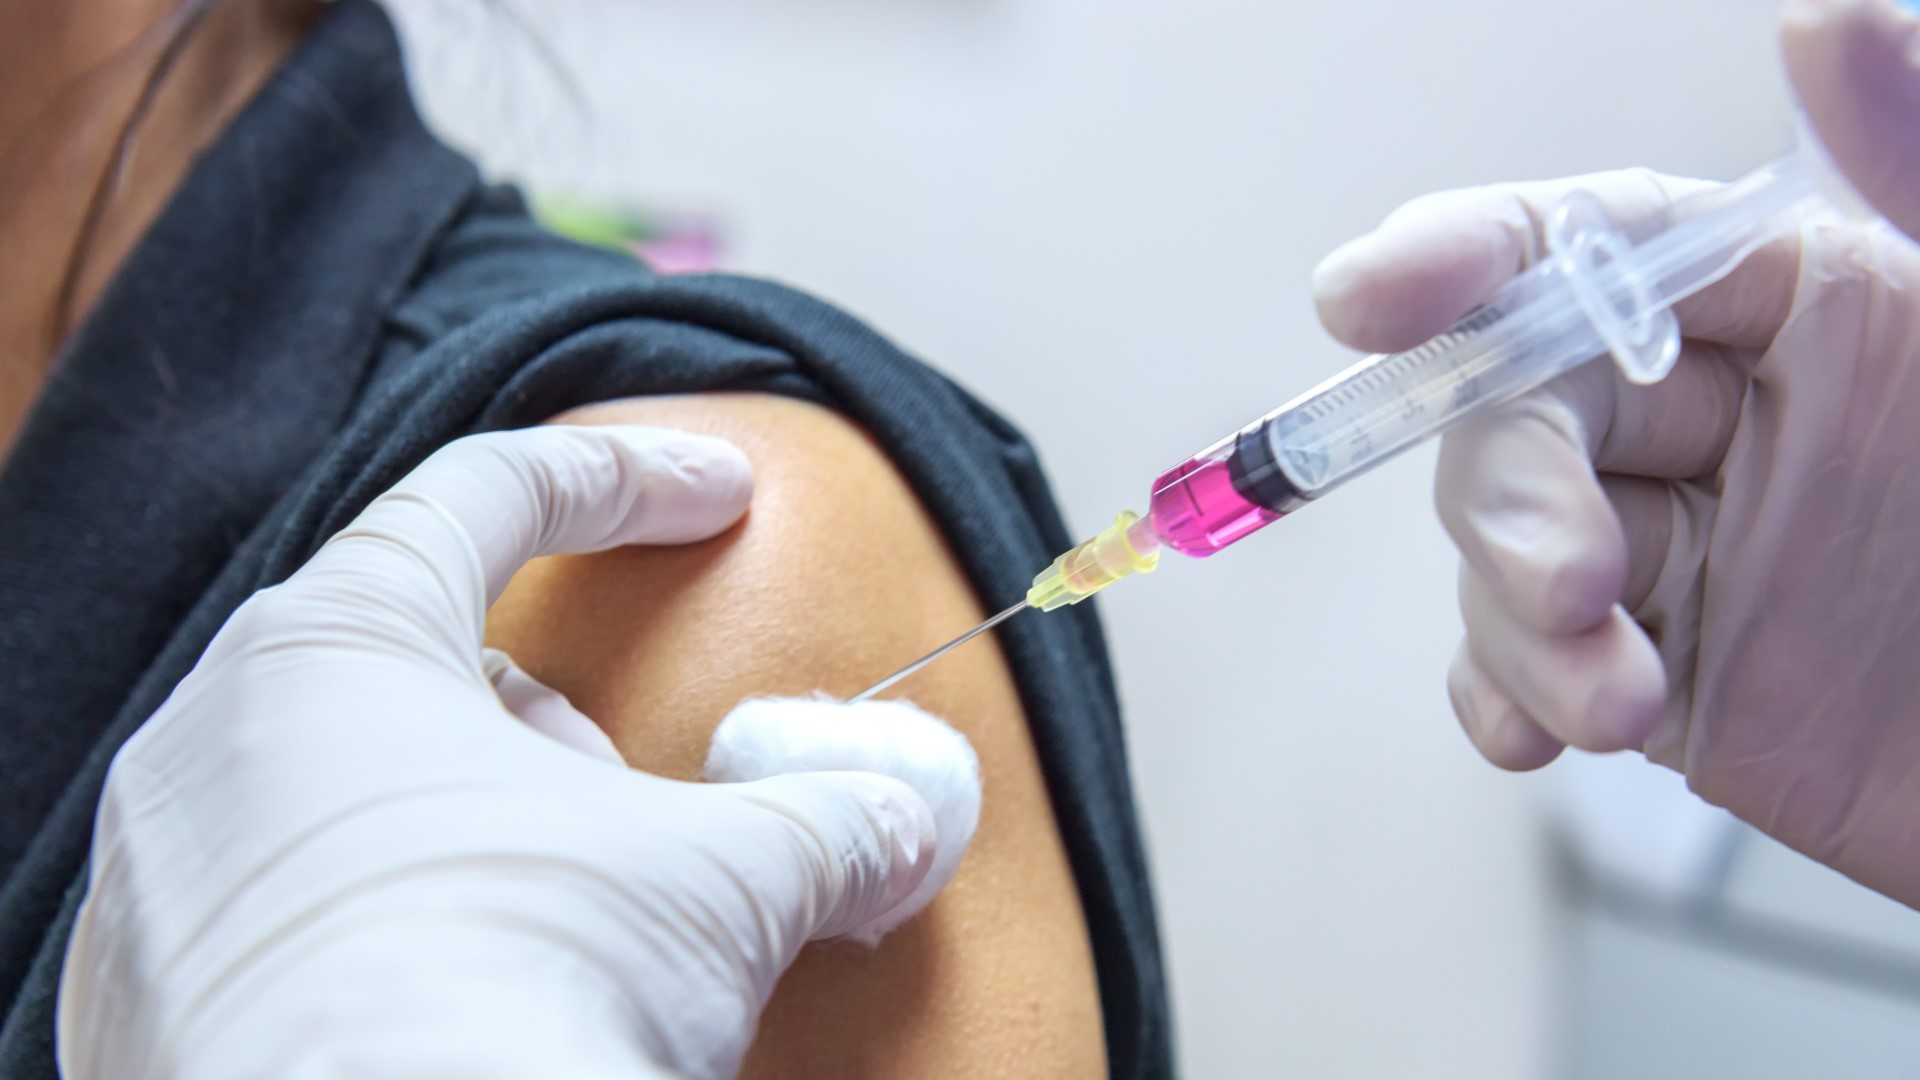 18 of the more than 2,300 people vaccinated Thursday had an adverse reaction.